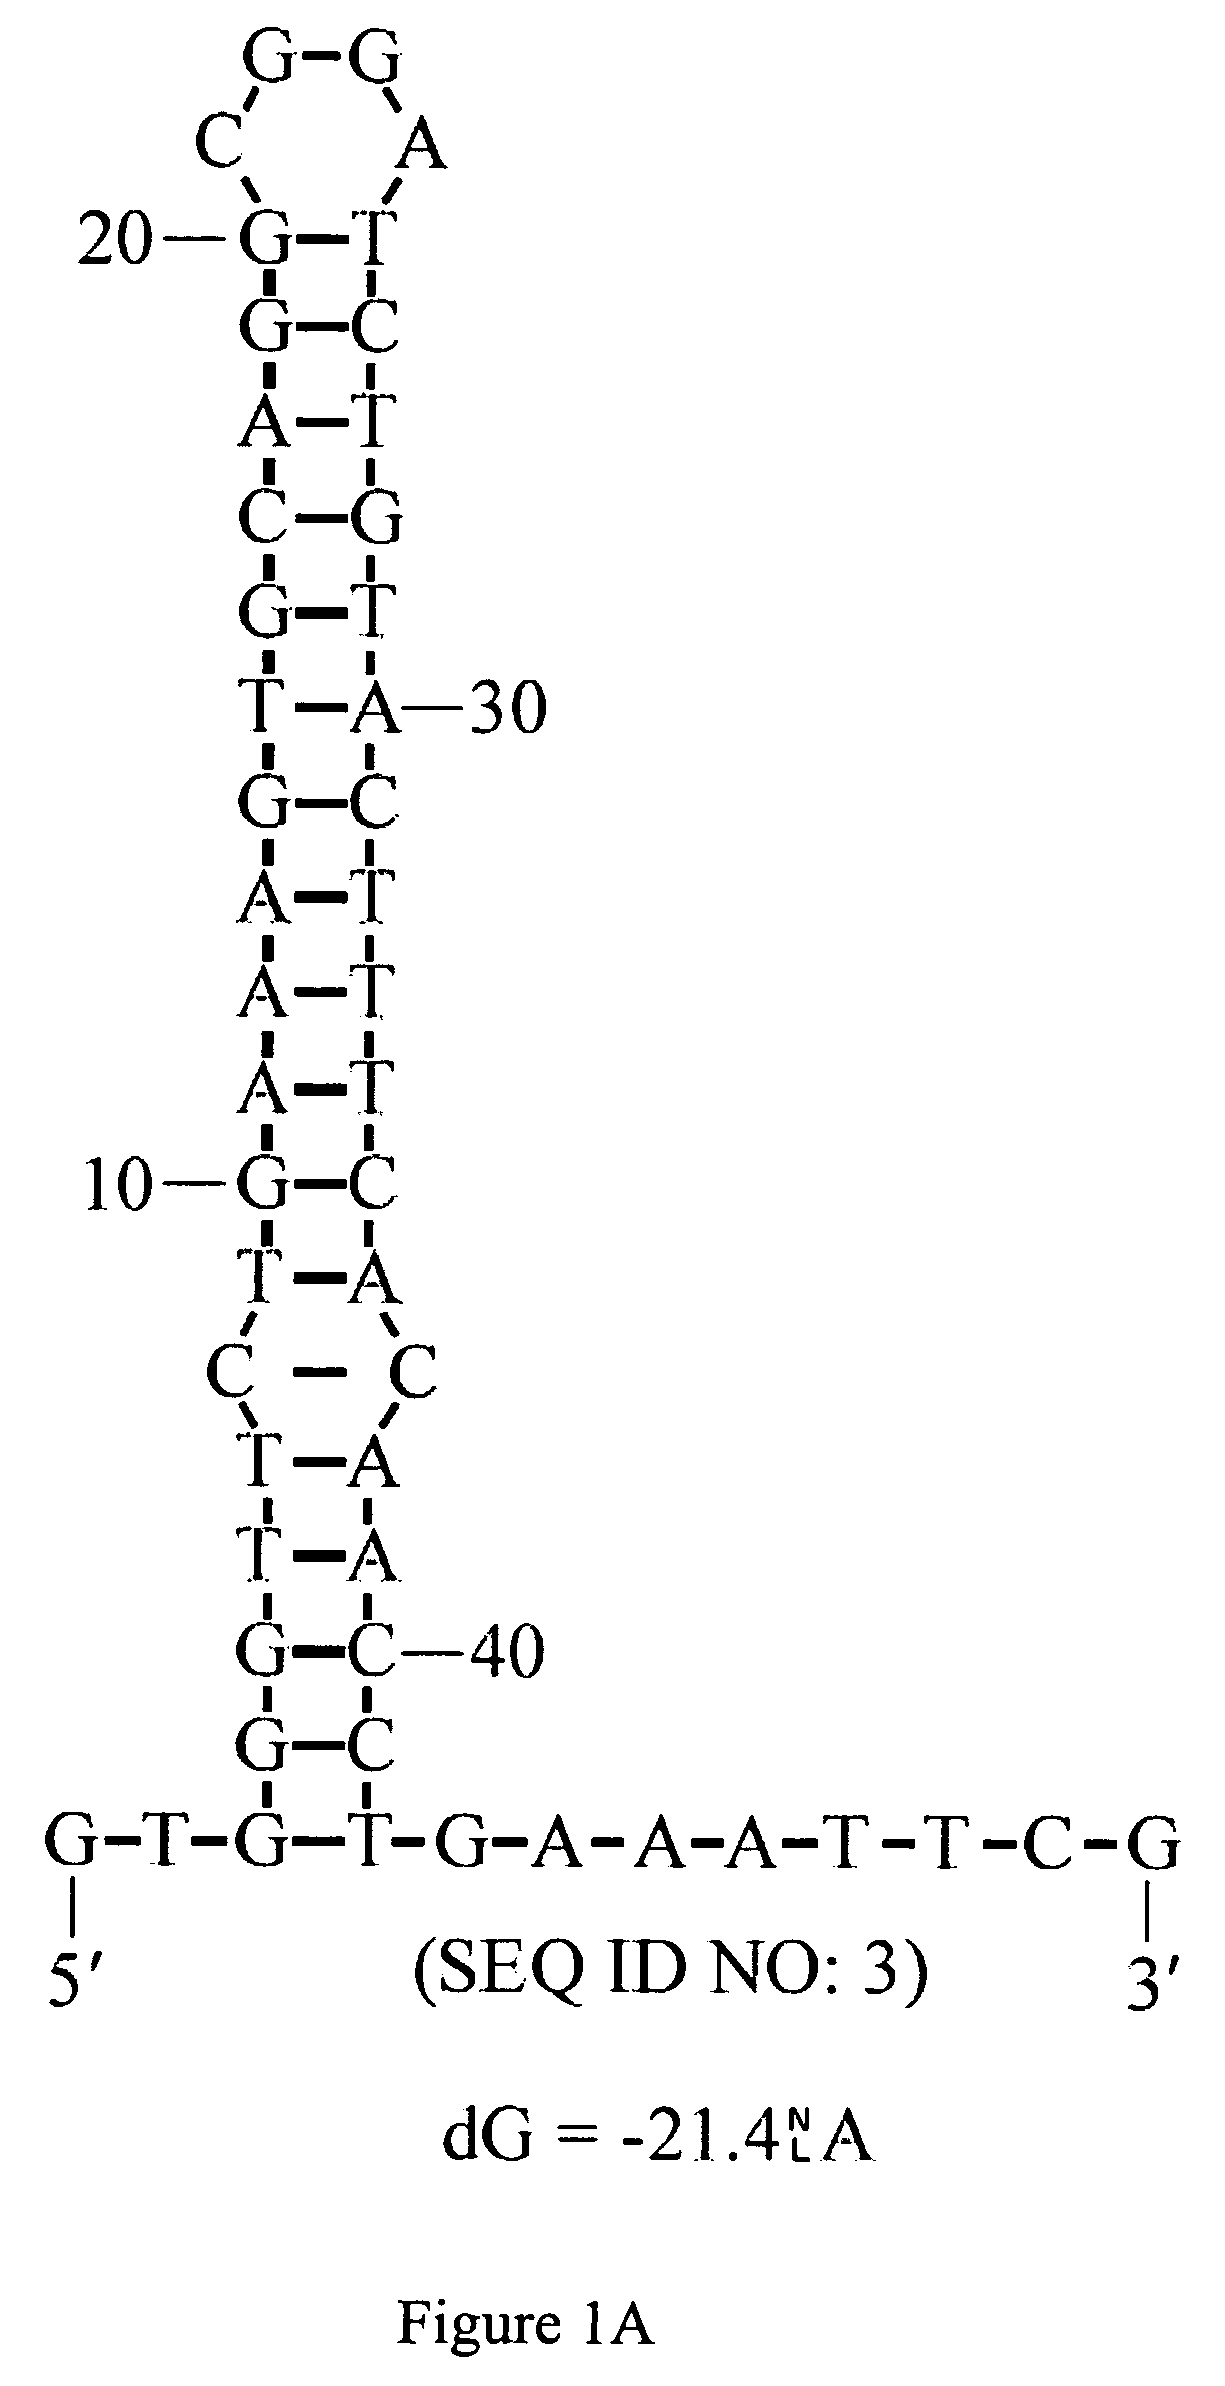 Systems and methods for constructing frequency lookup tables for expression systems